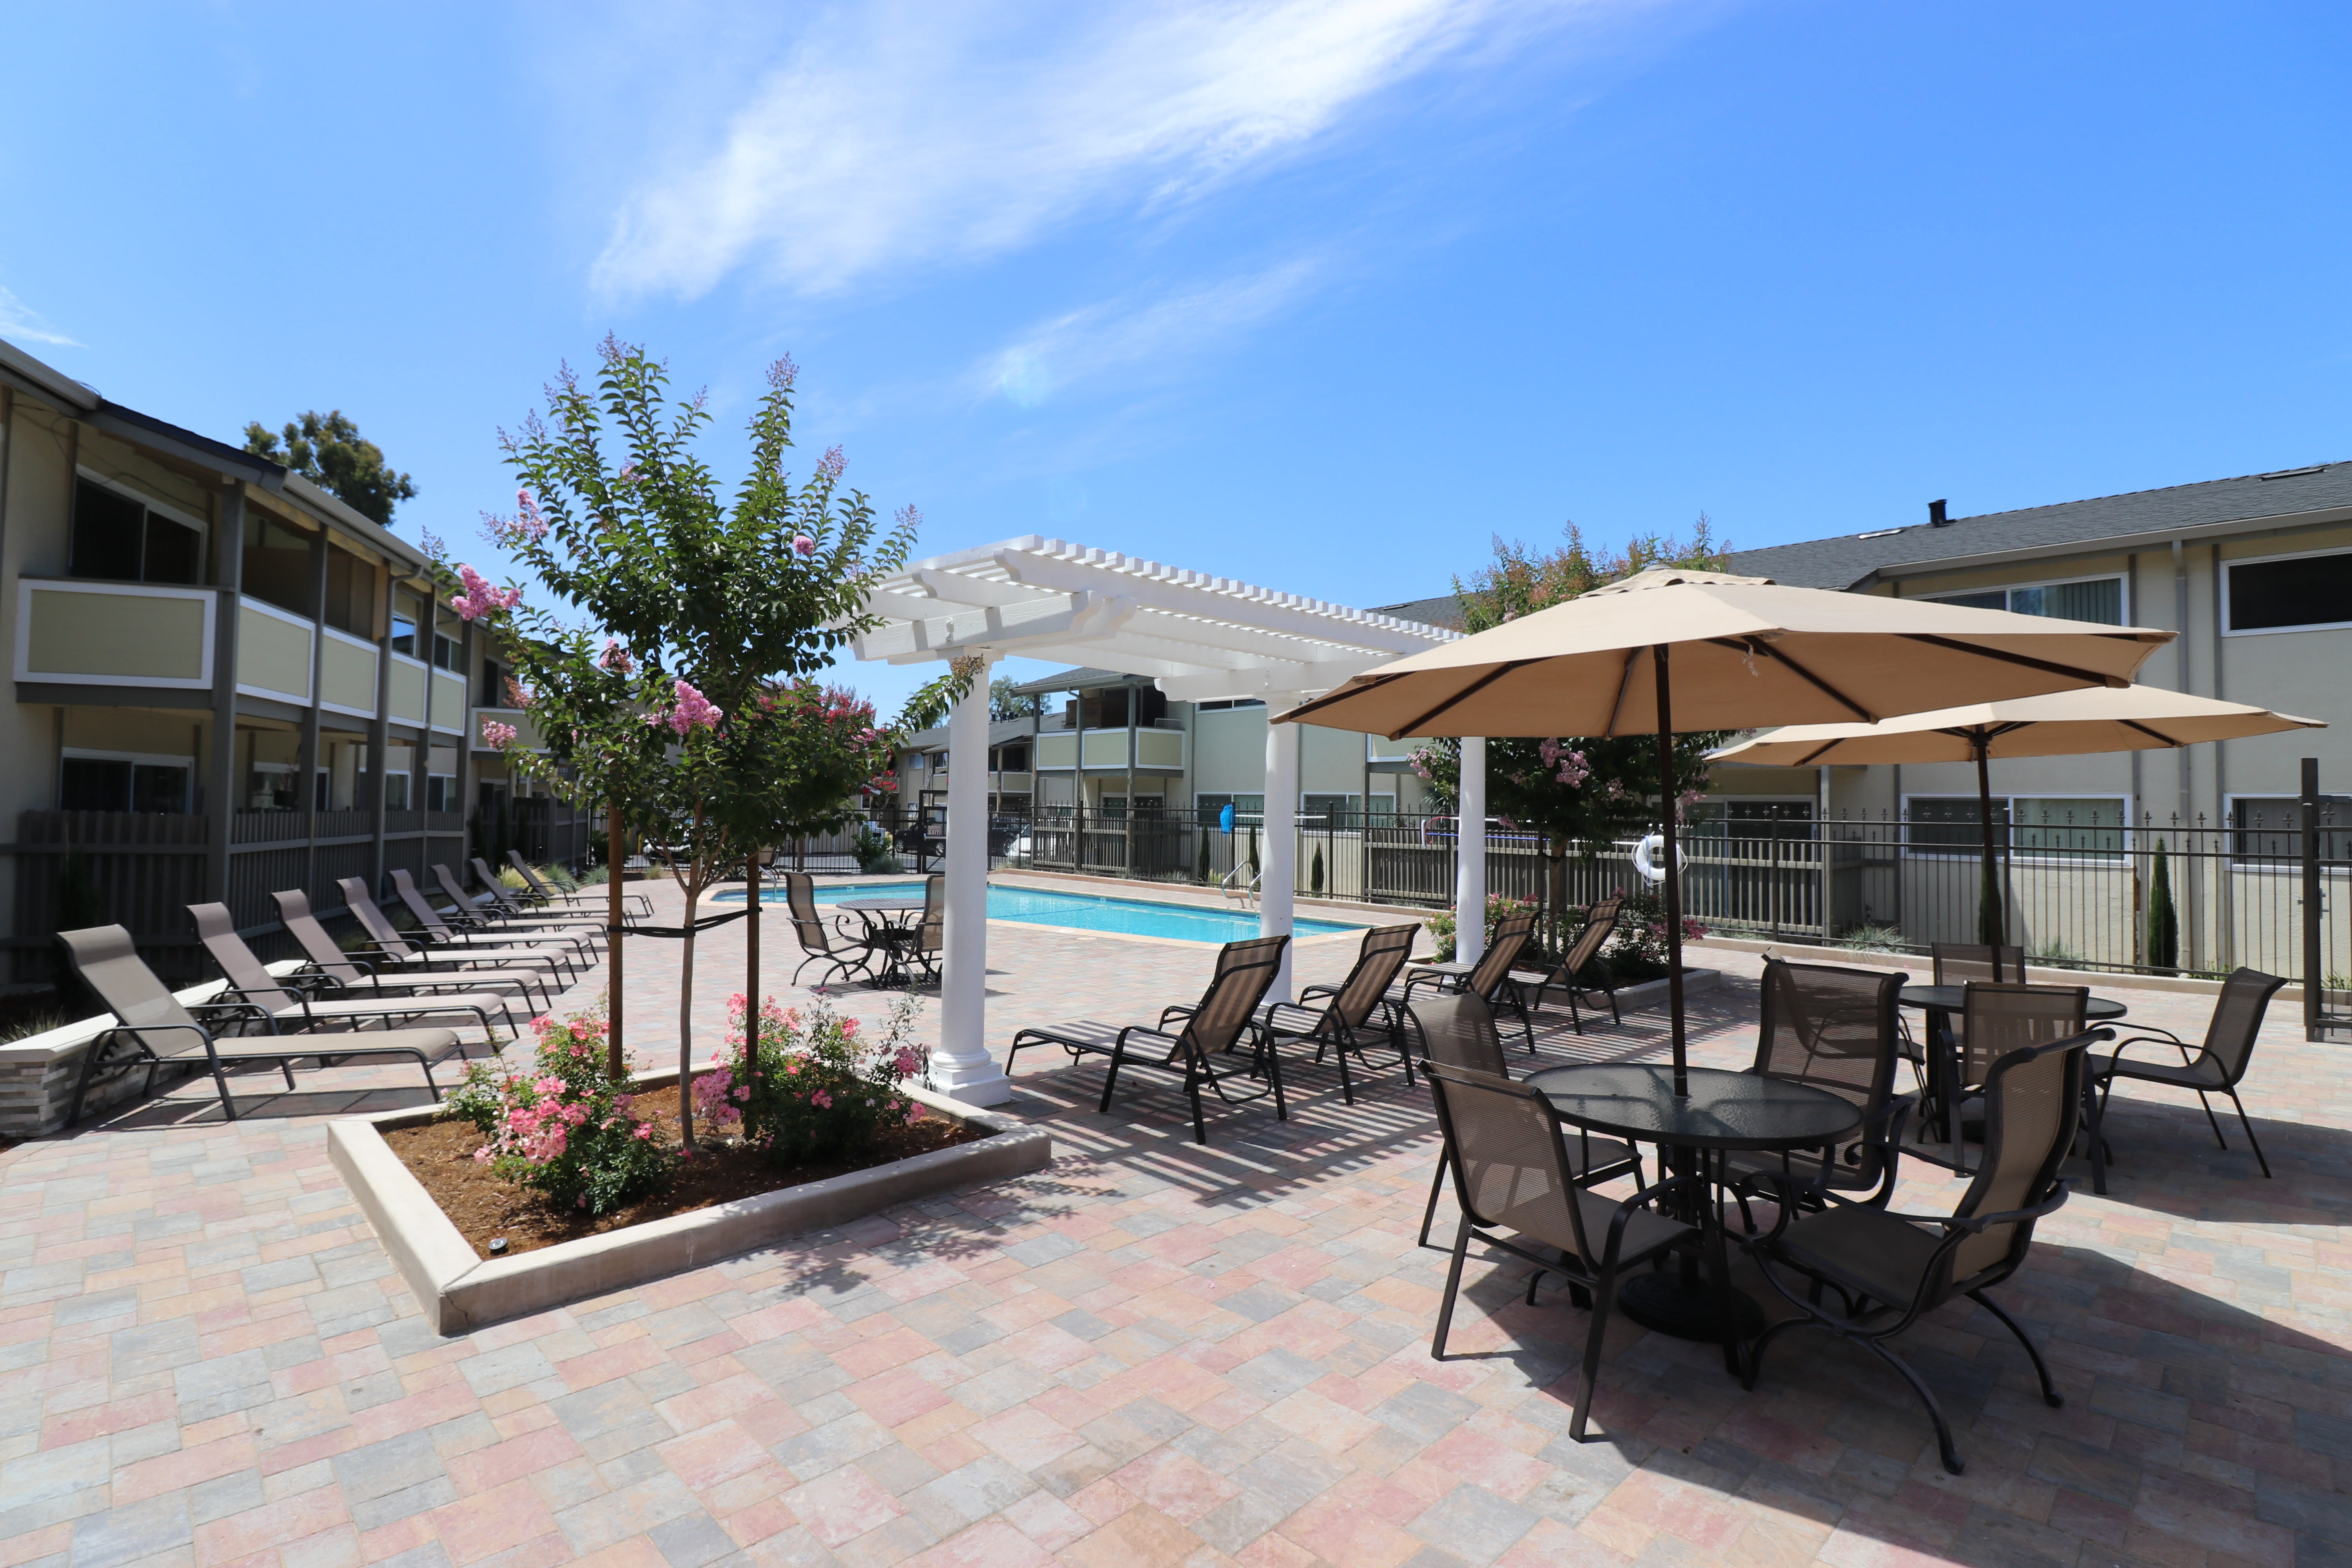 Comfortable spaces to relax on the courtyard at Fremont Arms Apartments in Fremont, California